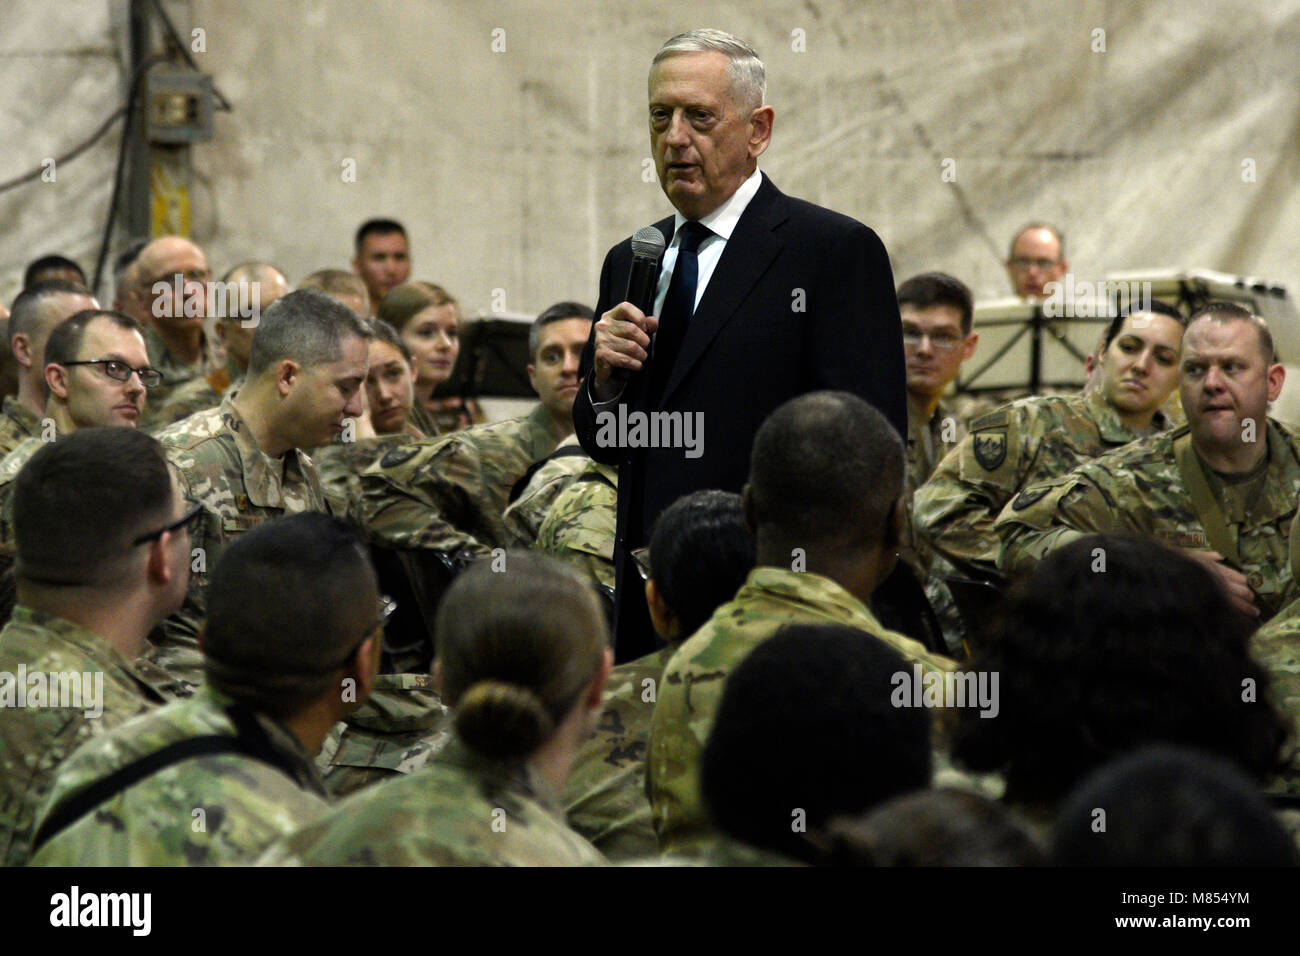 James Mattis, U.S. Secretary of Defense, conducts an all call with the men and women of Bagram Airfield, Afghanistan on Mar. 14, 2018. Mattis thanked the men and women at BAF for their service and sacrifice and answered questions about various topics. (U.S. Air Force photo/Tech. Sgt. Justin Jacobs) Stock Photo